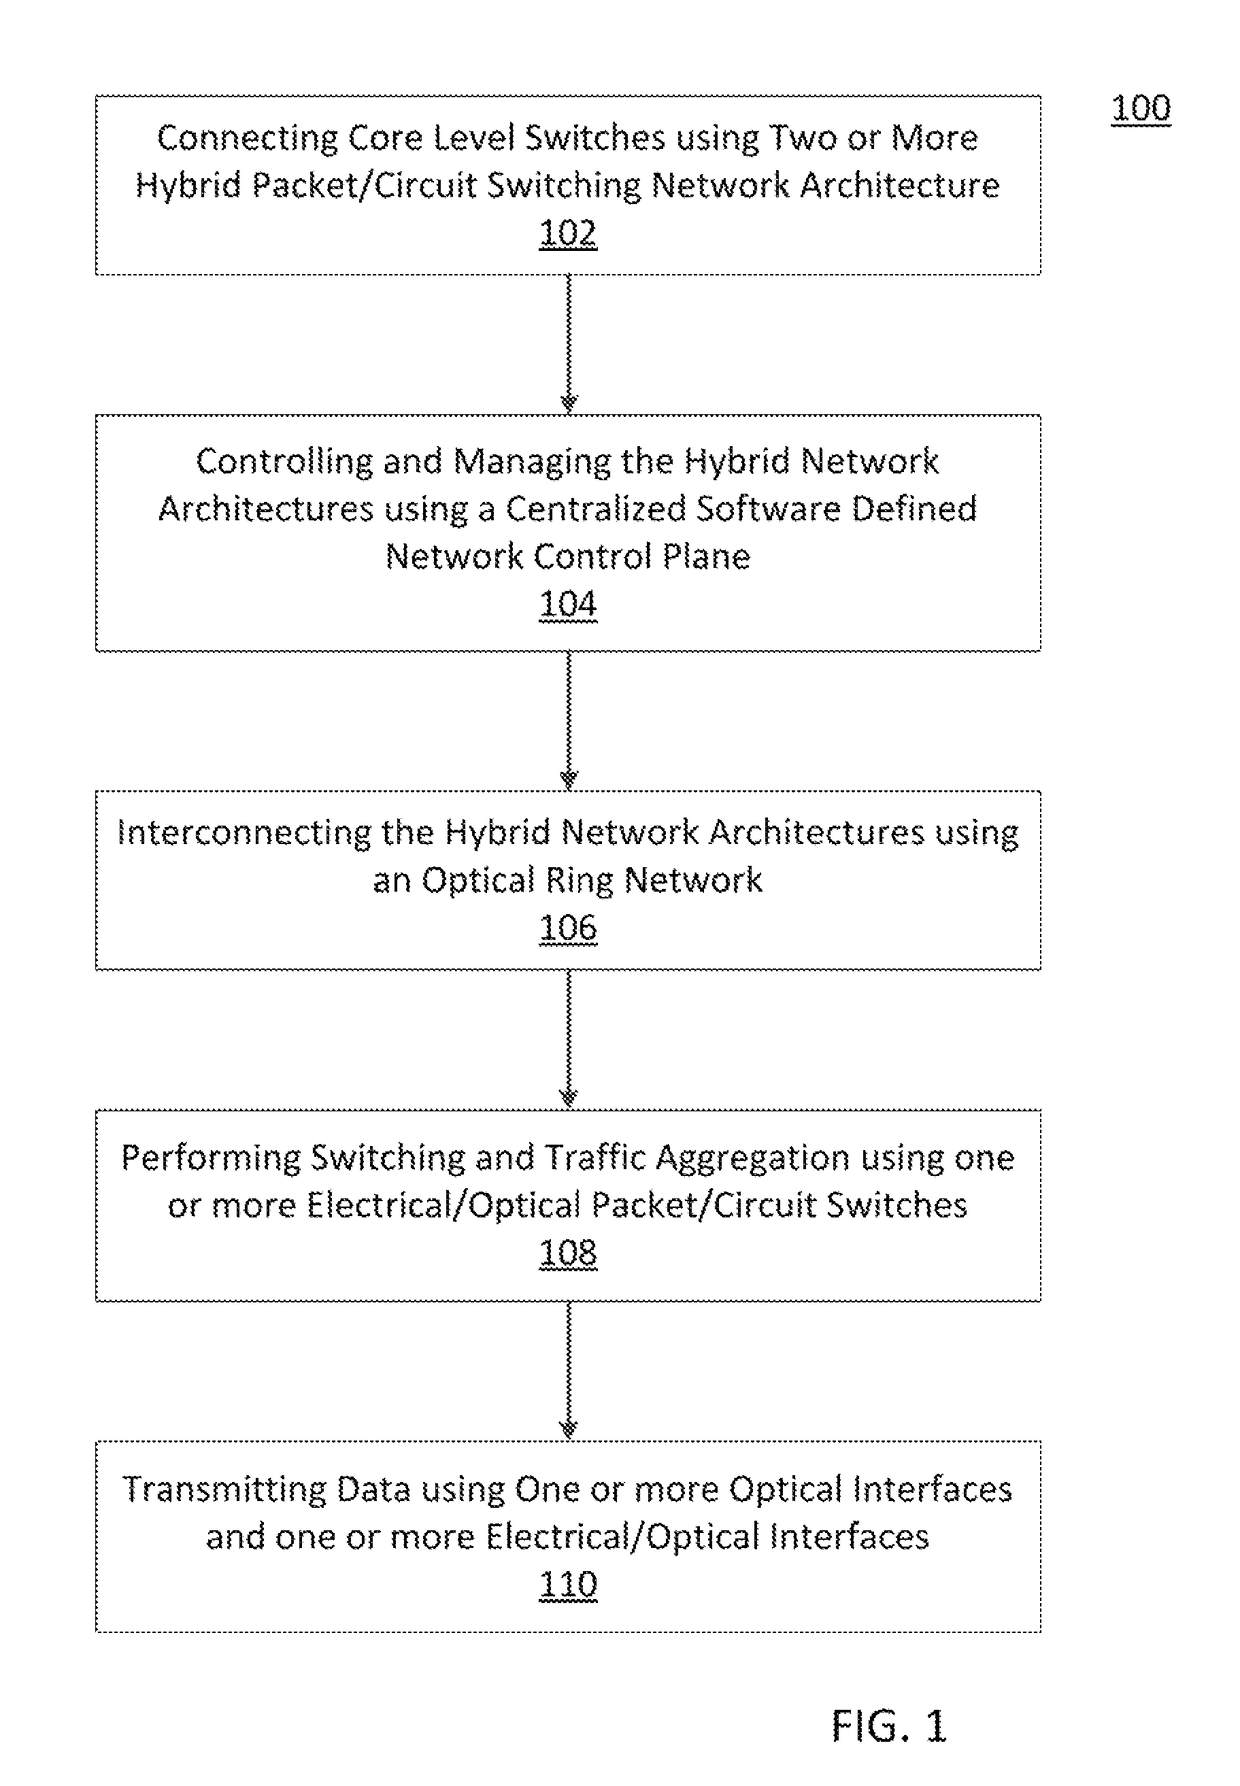 Scalable hybrid packet/circuit switching network architecture